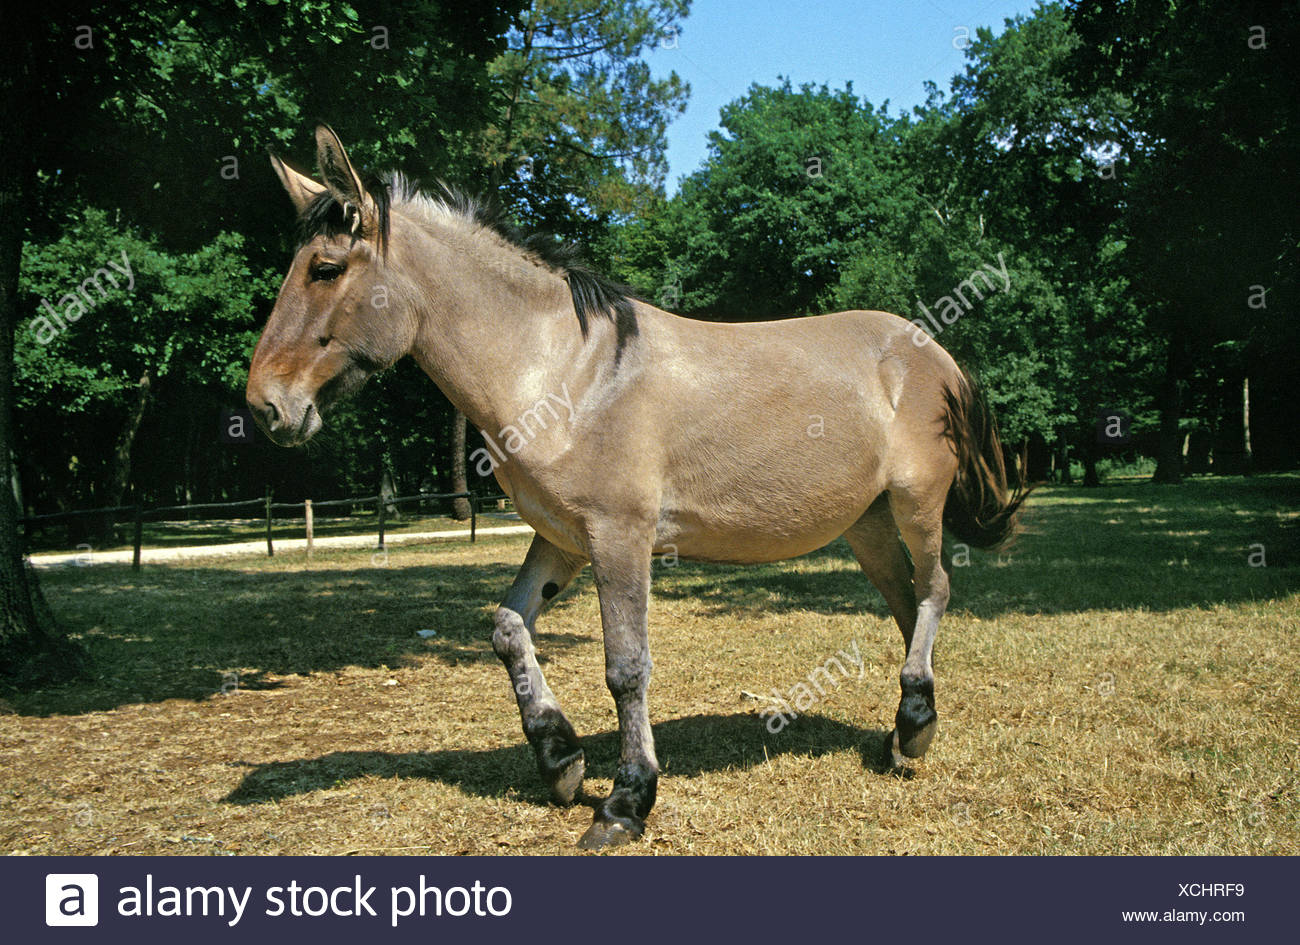 Mule Crossbreed Of A Male Donkey And A Female Horse Stock Photo Alamy